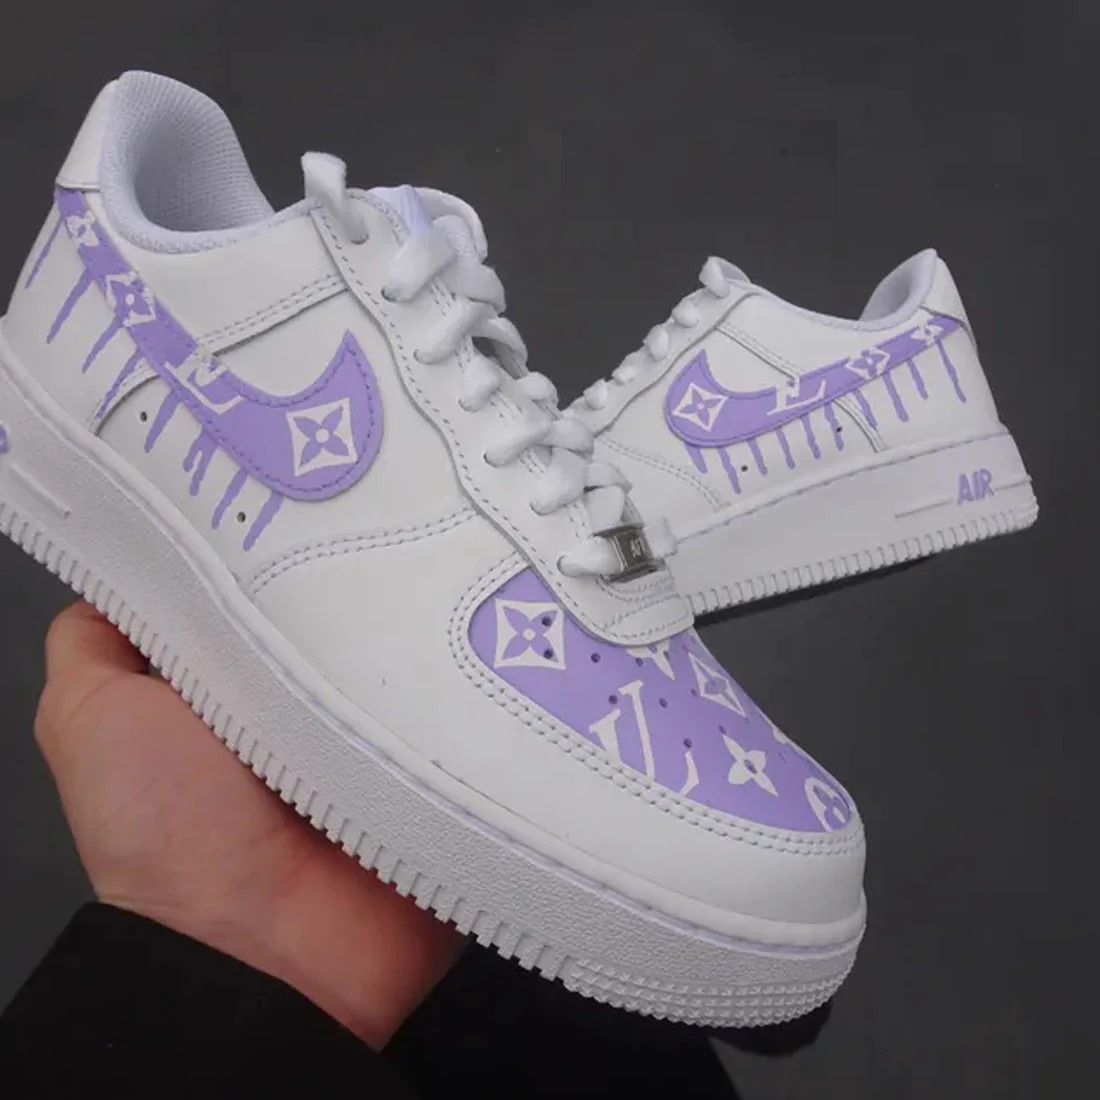 118 Likes, 22 Comments - Tai (@taicustomkicks) on Instagram: “Custom purple  and blue LV drip AF1's💧💧.Made for…